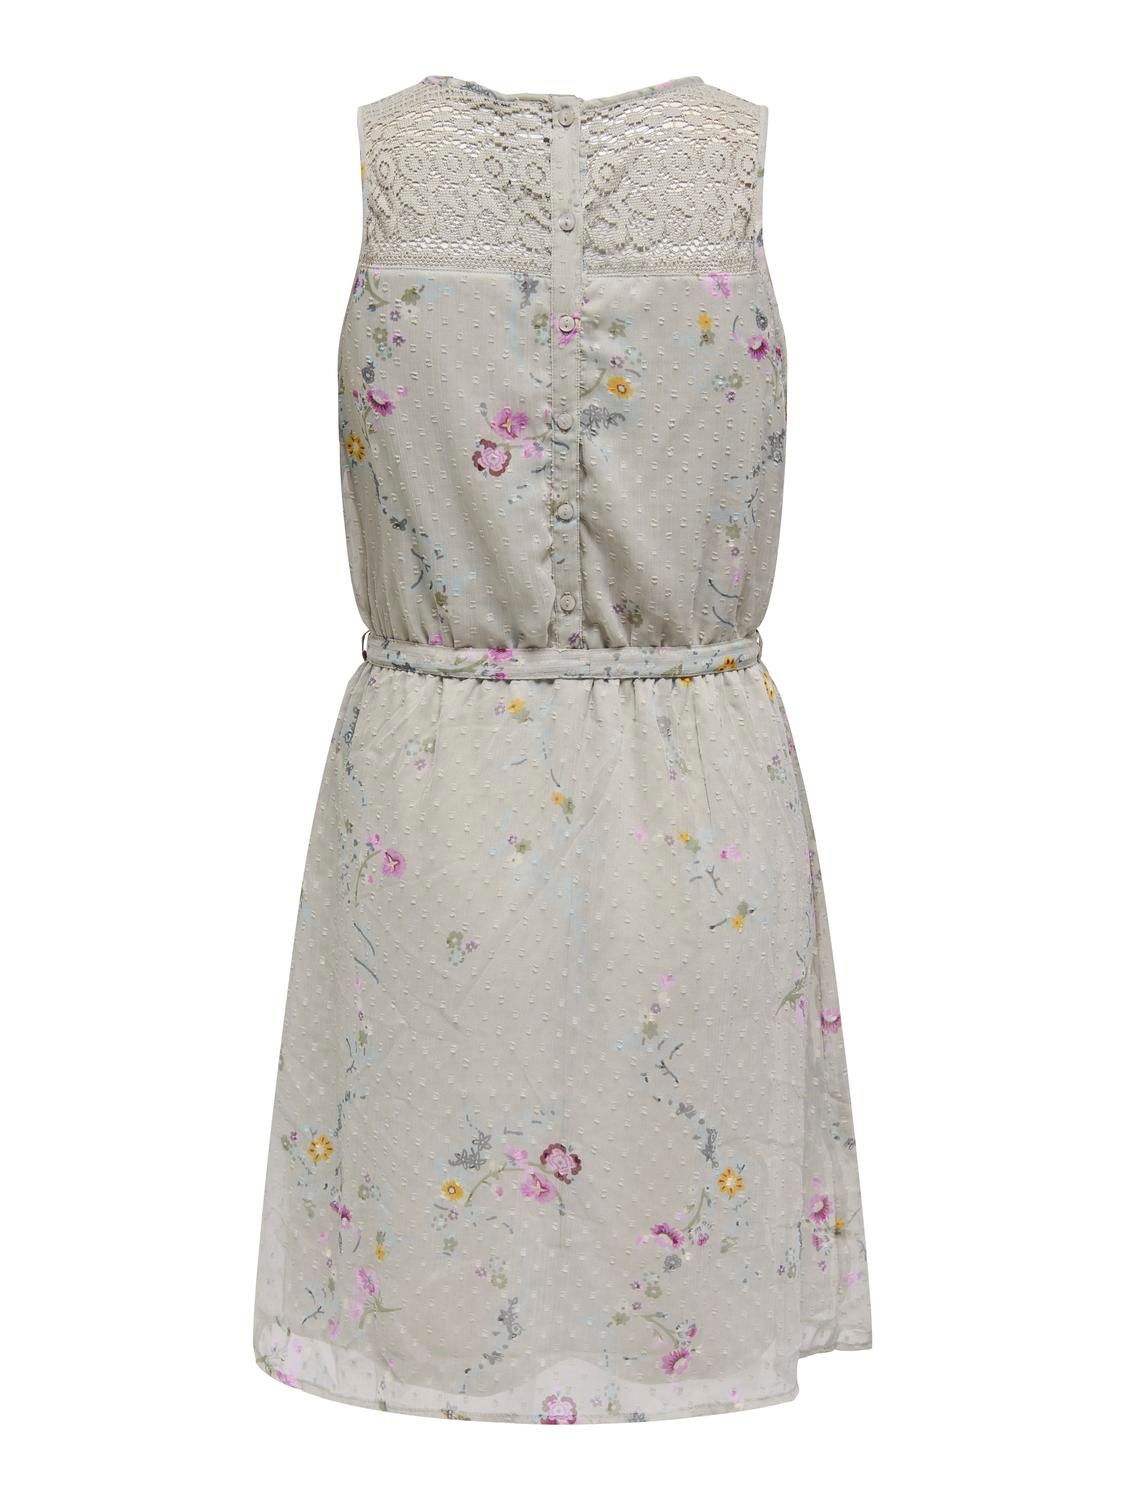 ONLY Printed dress with lace detail -Pumice Stone - 15314620